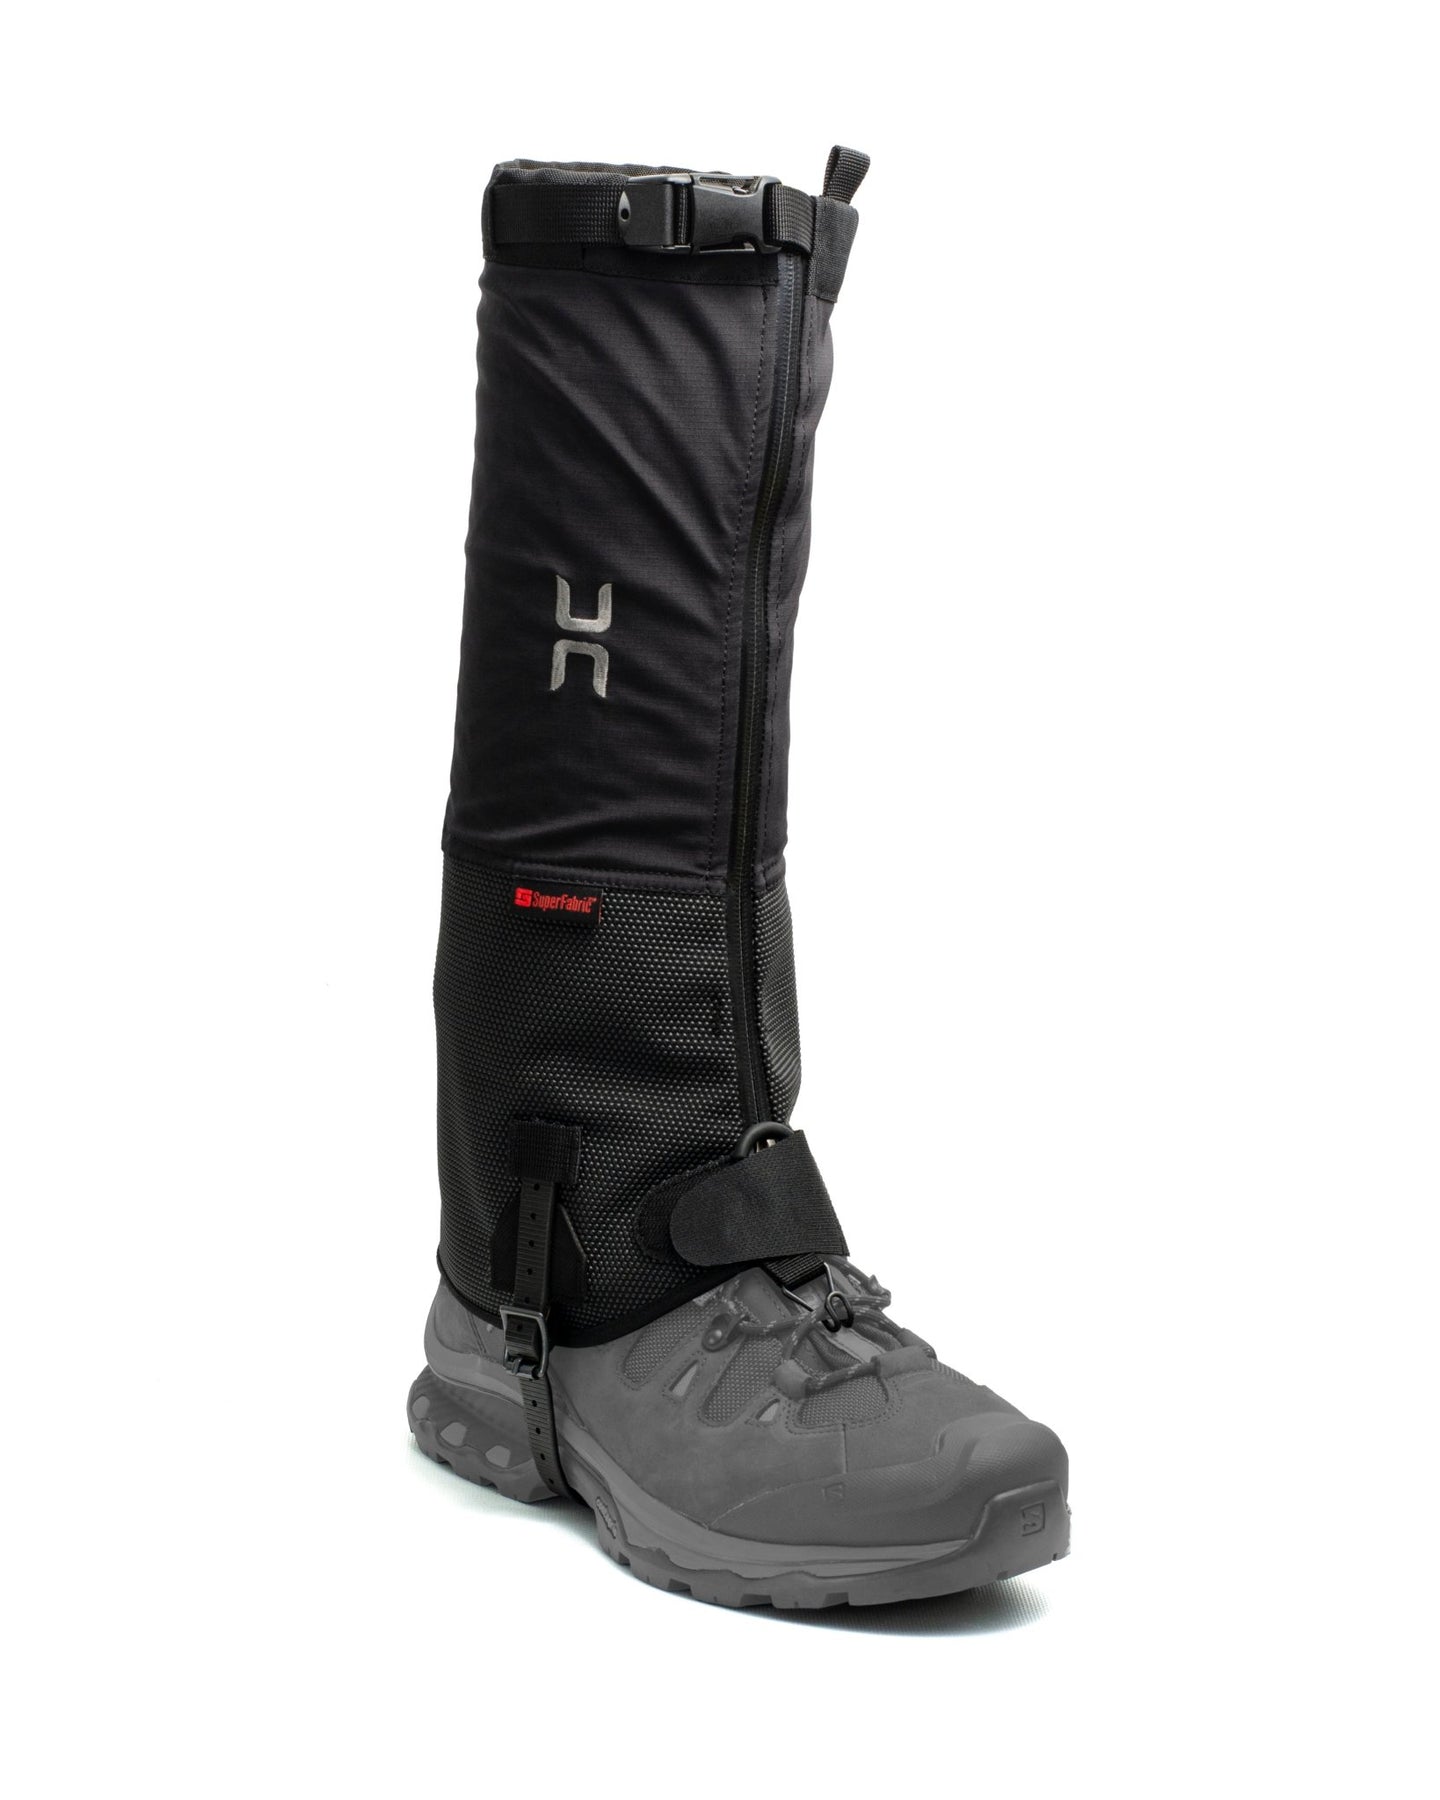 Super Armadillo Gaiters - Snowshoeing Hiking Backpacking | Hillsound ...